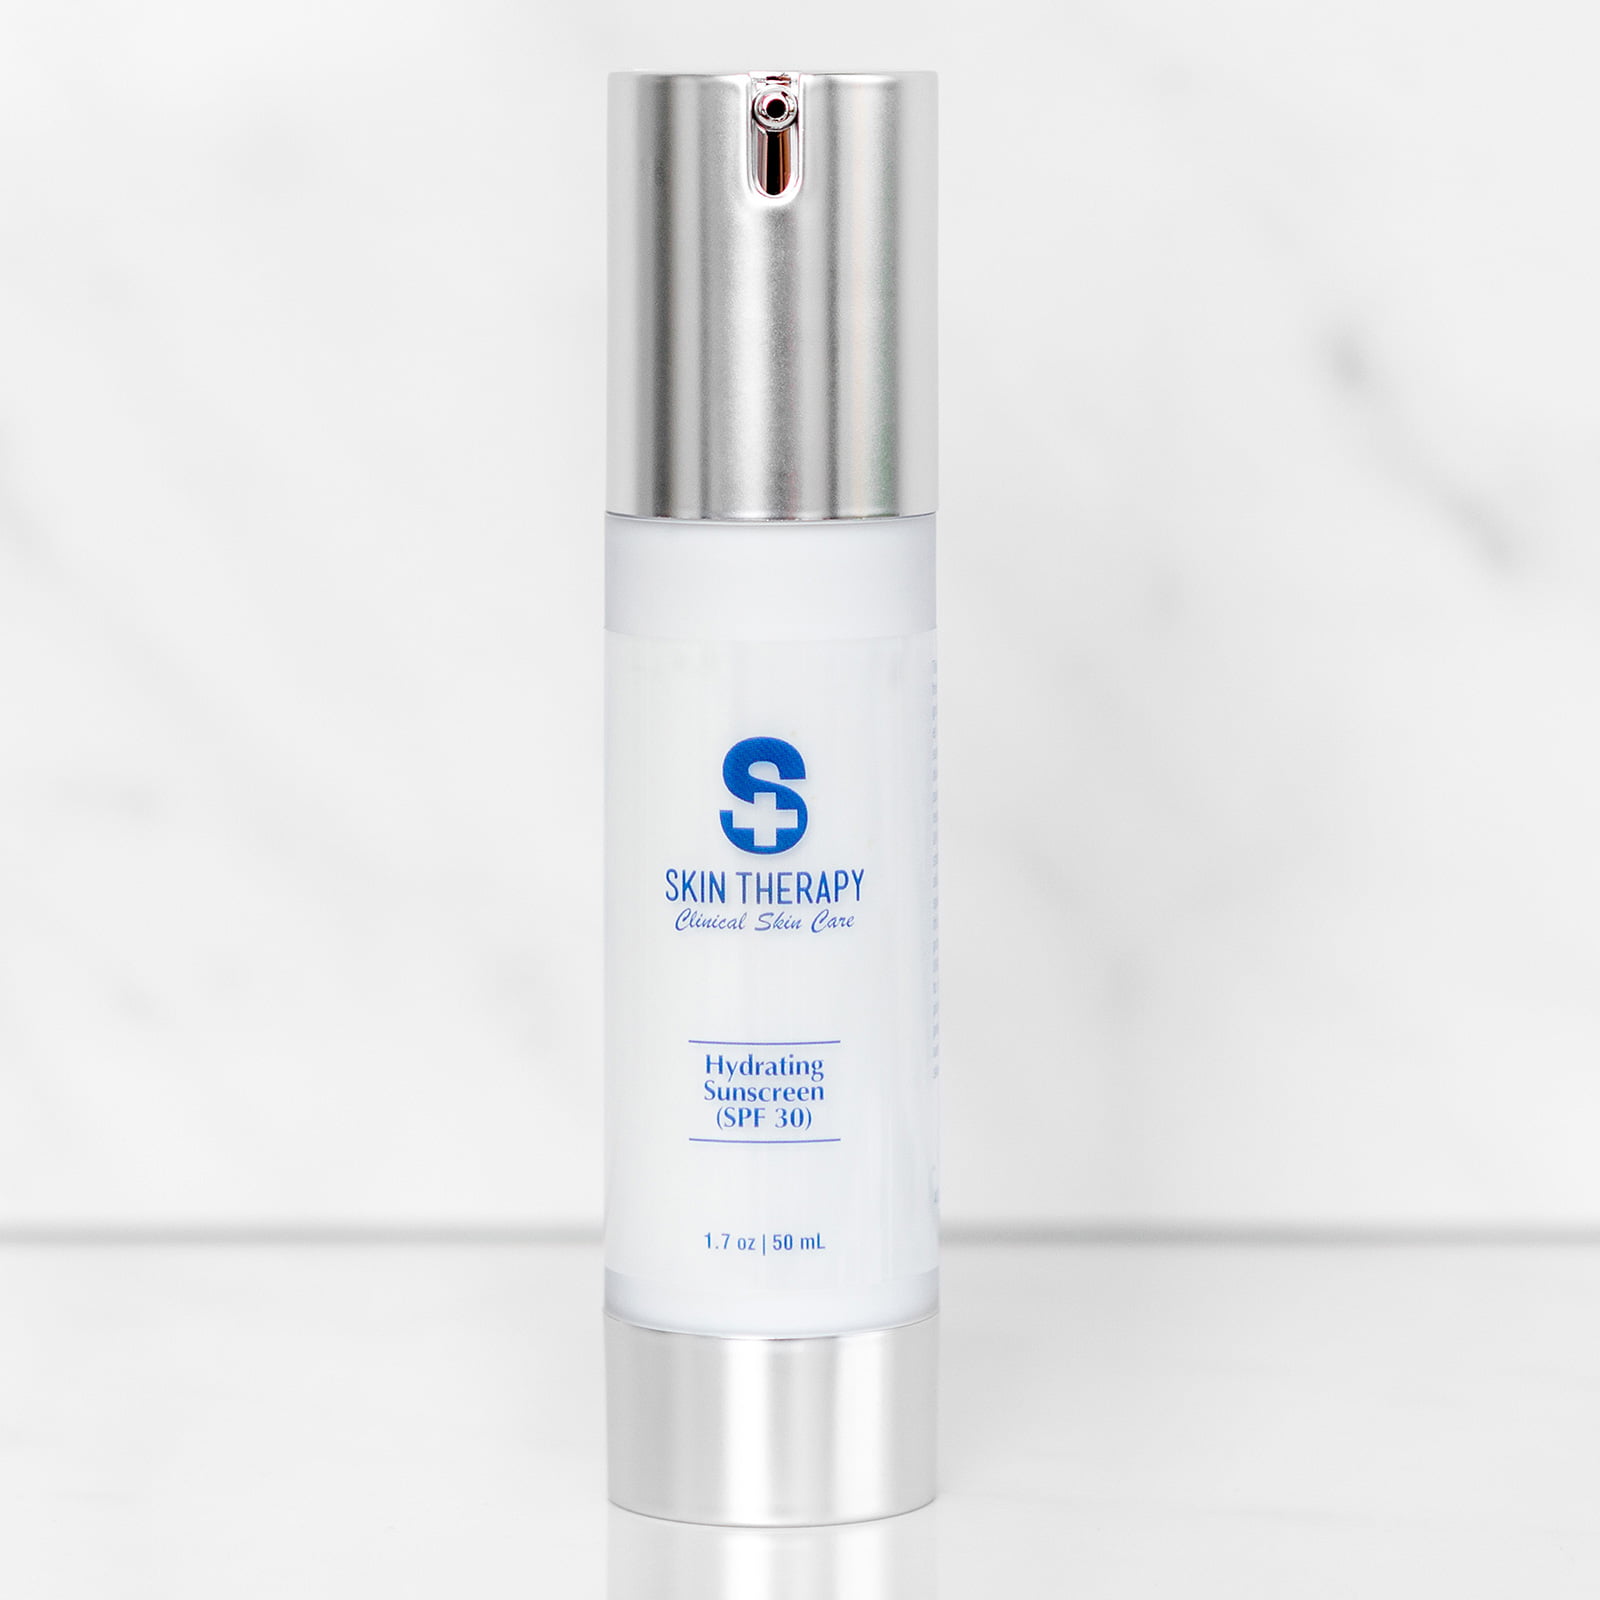 Hydrating Sunscreen with Titanium Dioxide (SPF 30) - The Skin Therapy Studio